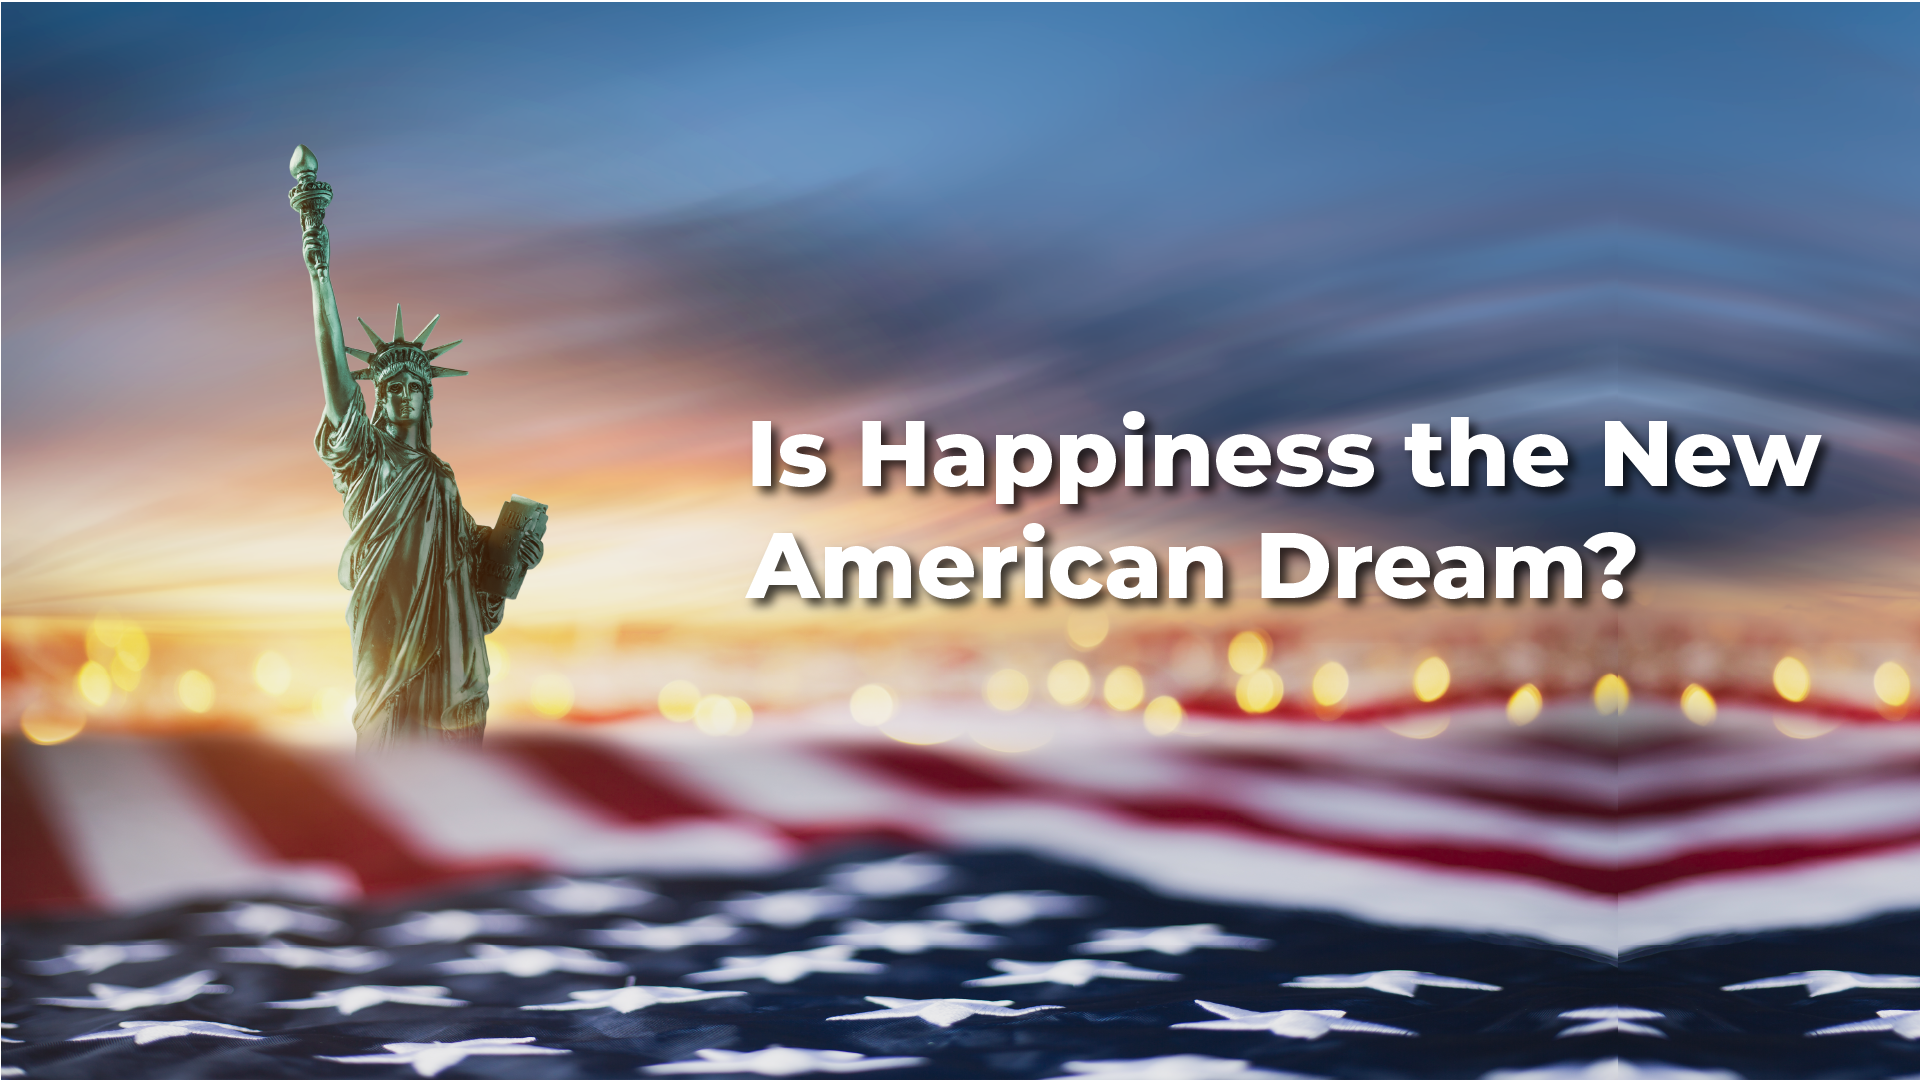 Is Happiness the New American Dream?